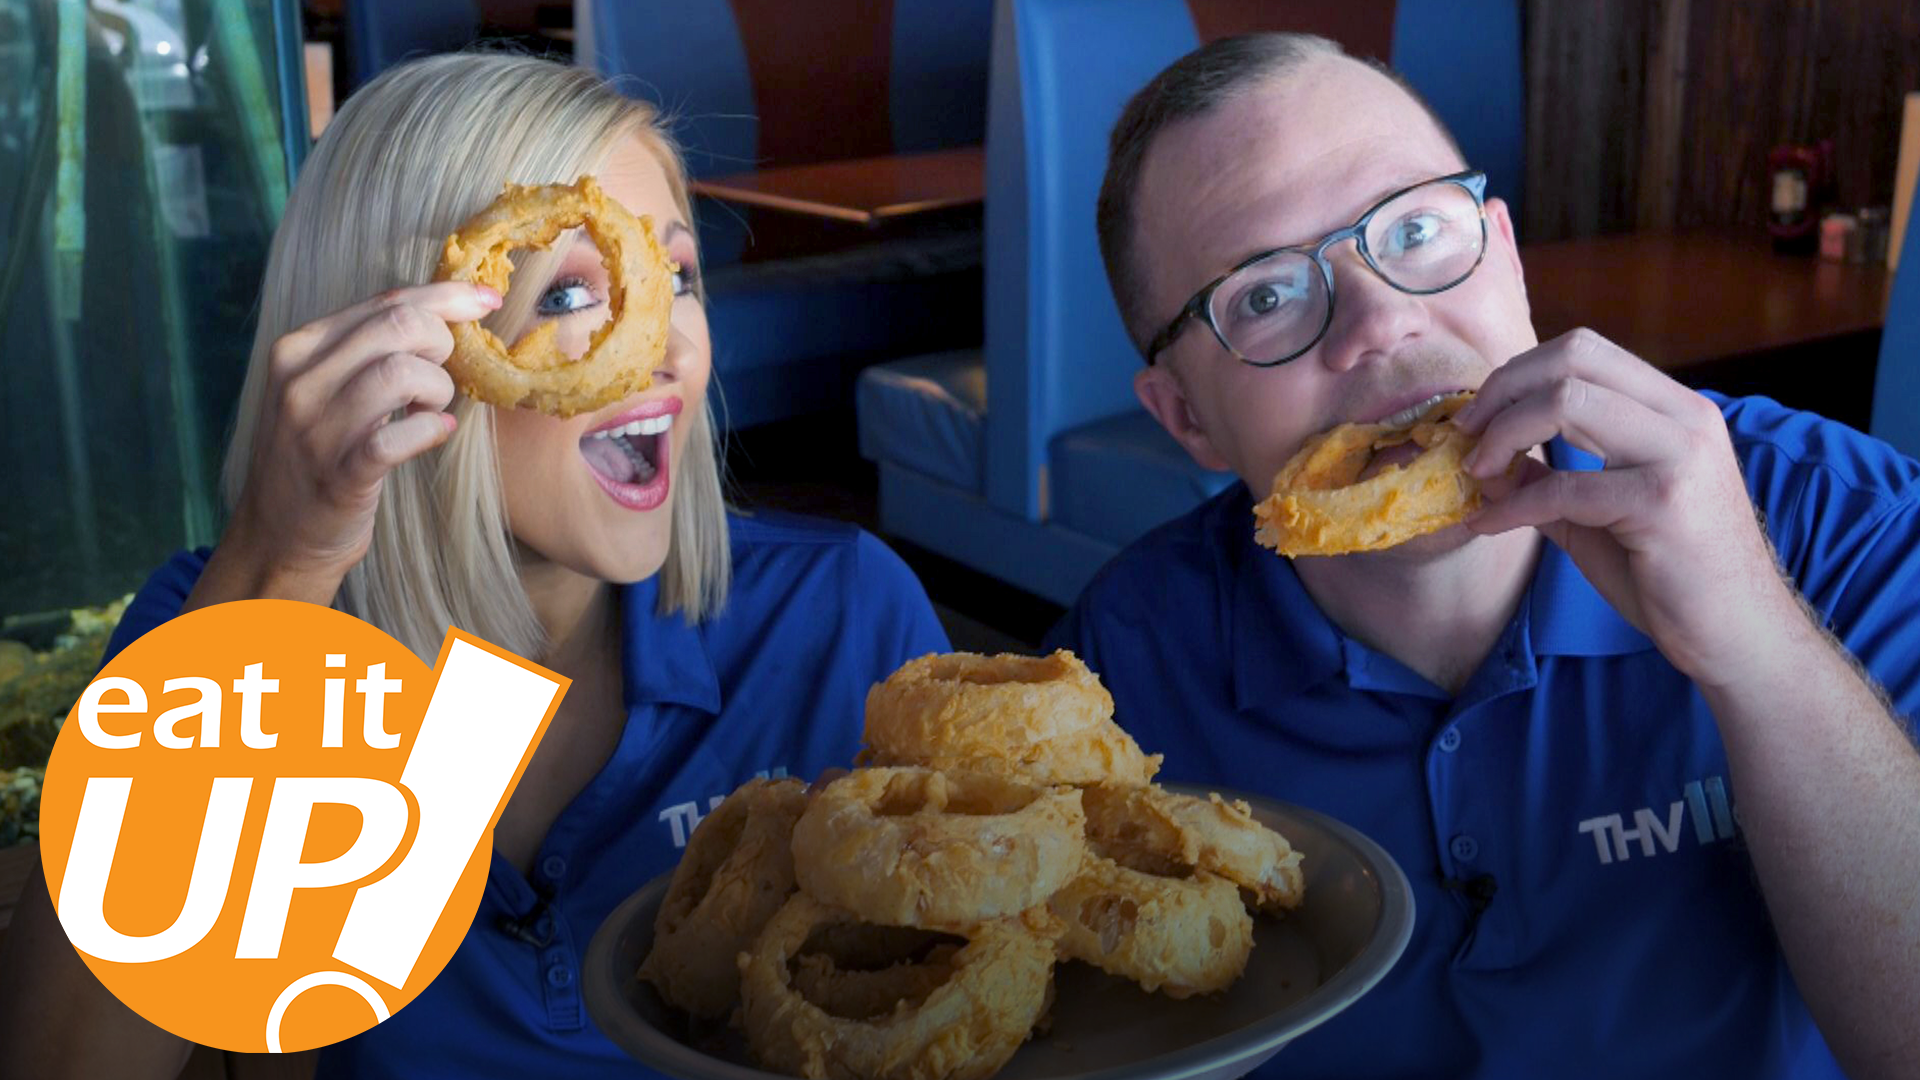 This week, we are visiting a place viewers have been asking us to try for a long time and you all did not let us down with this recommendation!